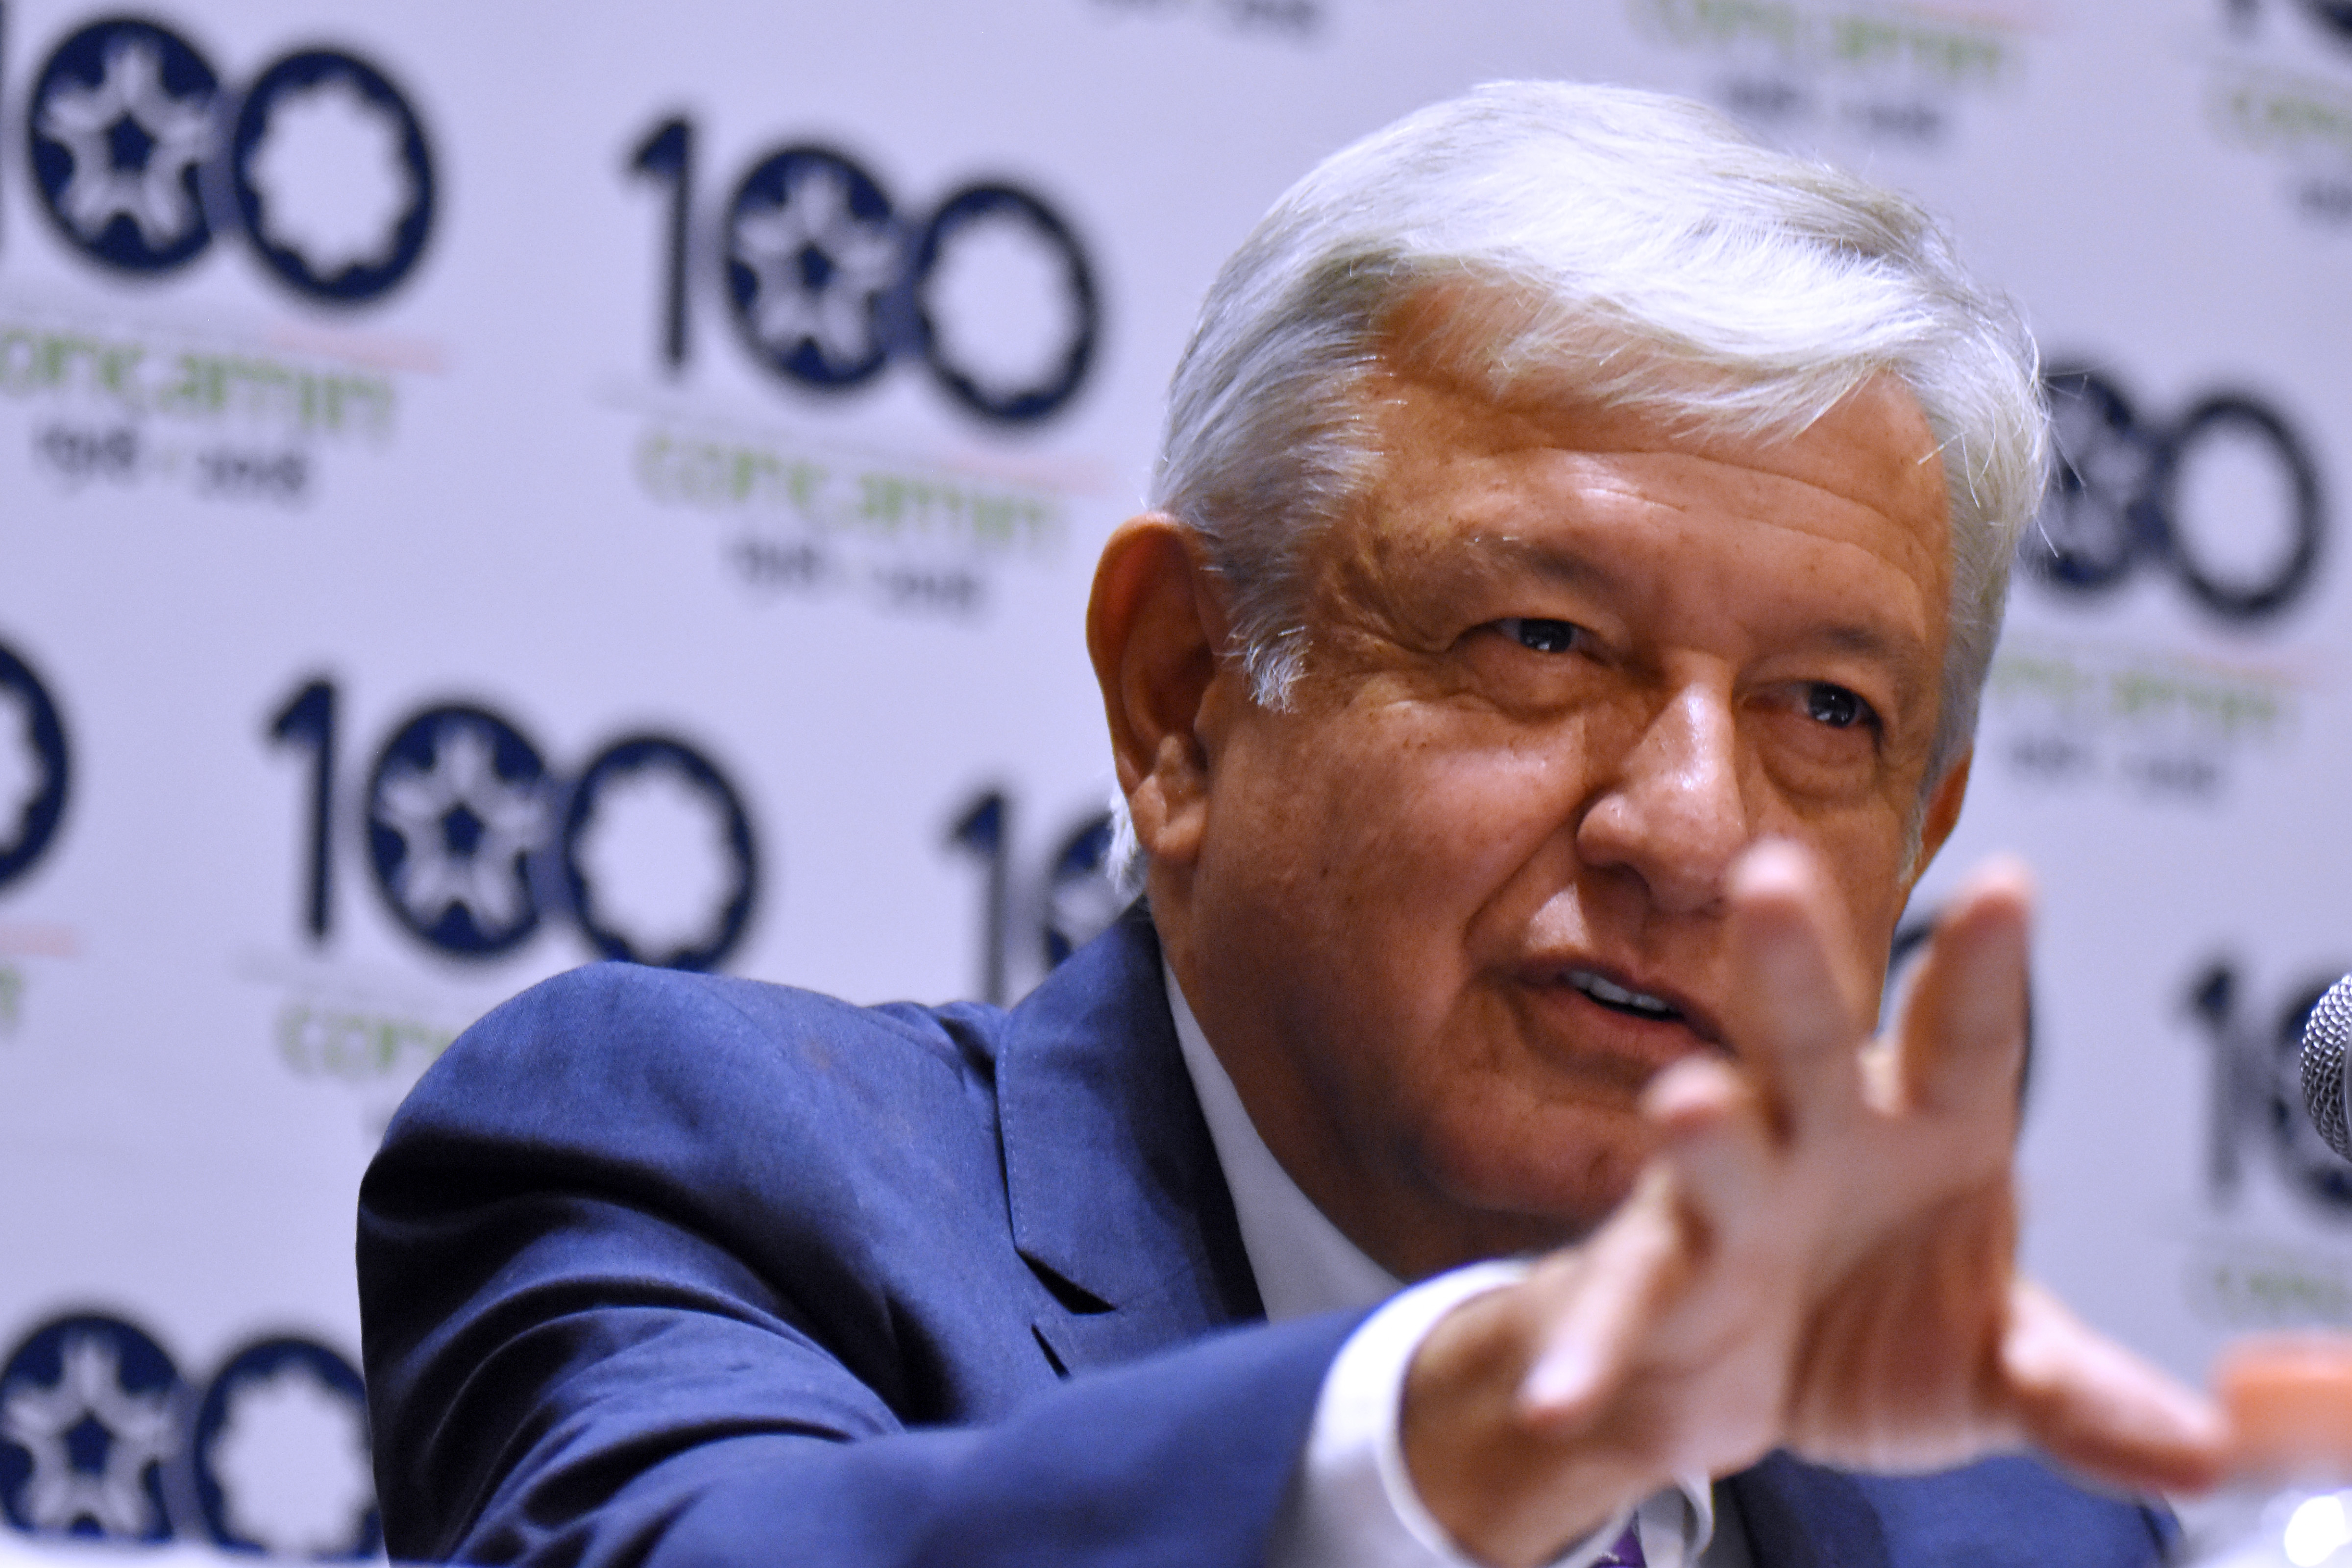 Newly elected President of Mexico Andres Manuel Lopez Obrador speaks during a press conference after a meeting between himself and President of the CONCAMIN Francisco Cervantes Diaz at Hyatt Regency Polanco hotel on July 9, 2018 in Mexico City, Mexico. (Carlos Tischler&mdash;Getty Images)